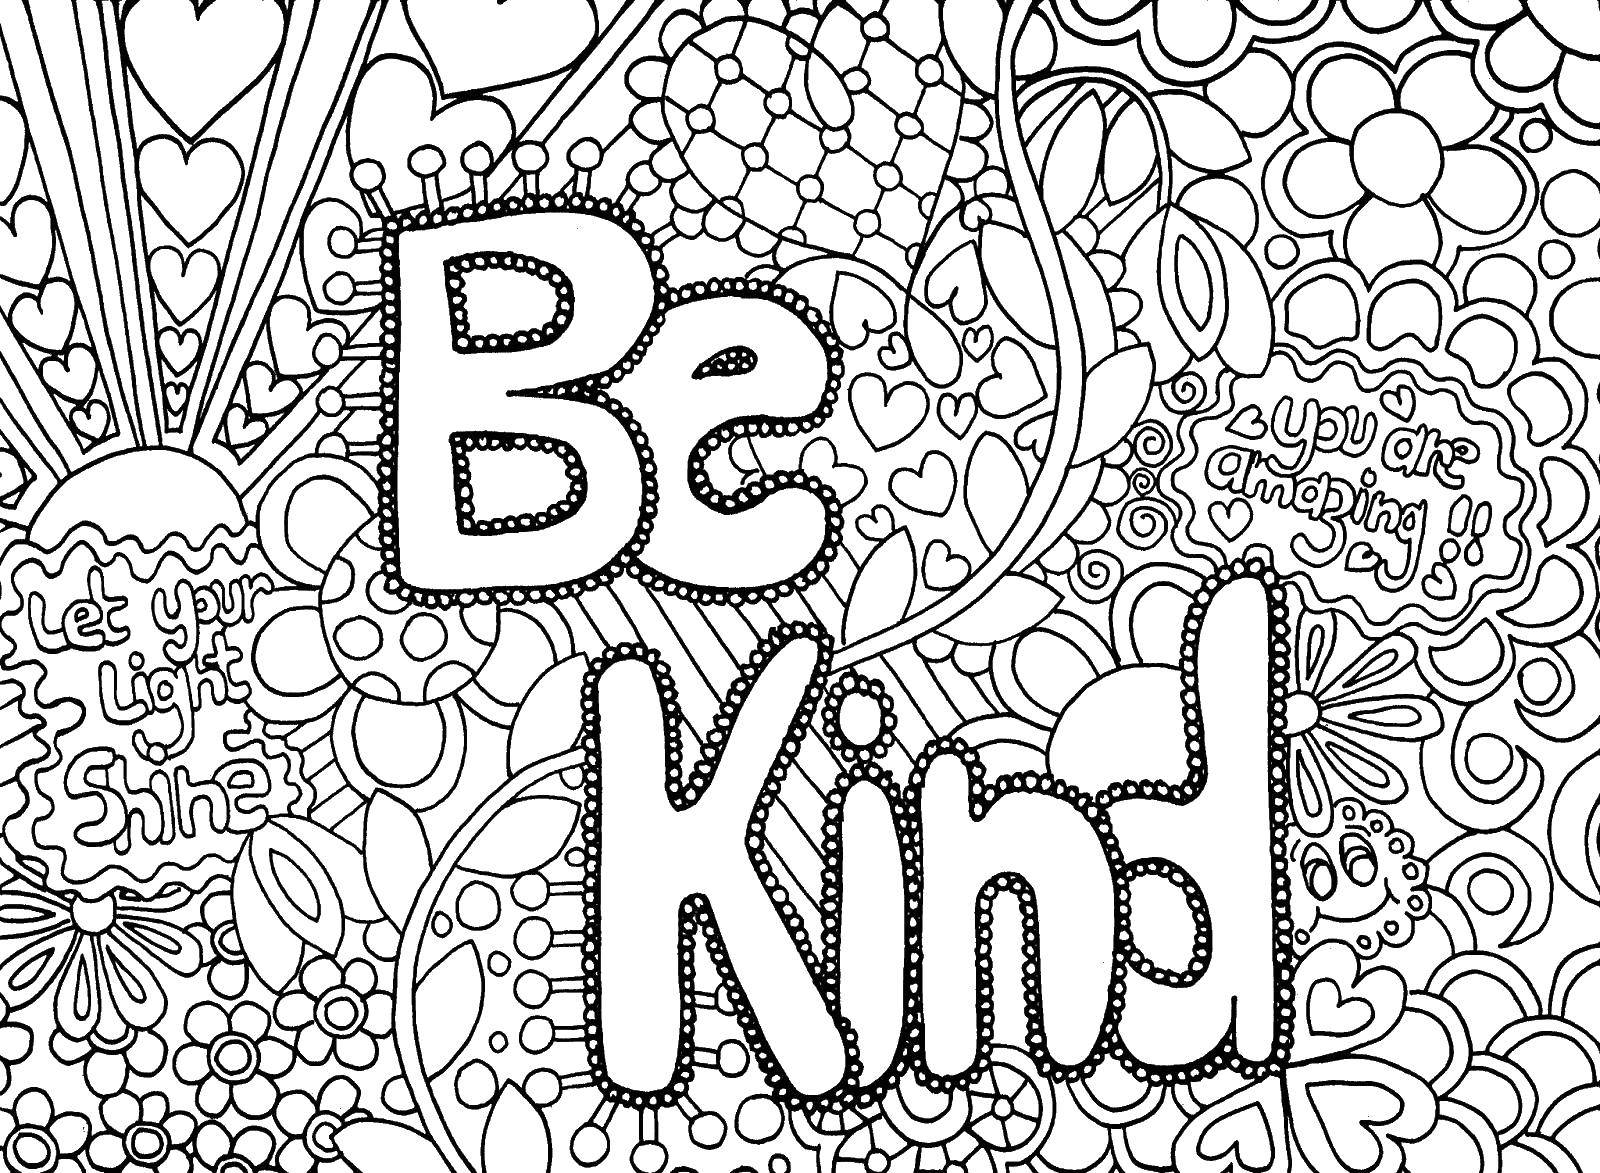 Coloring Be kind. Category patterns. Tags:  patterns, flowers, lines.